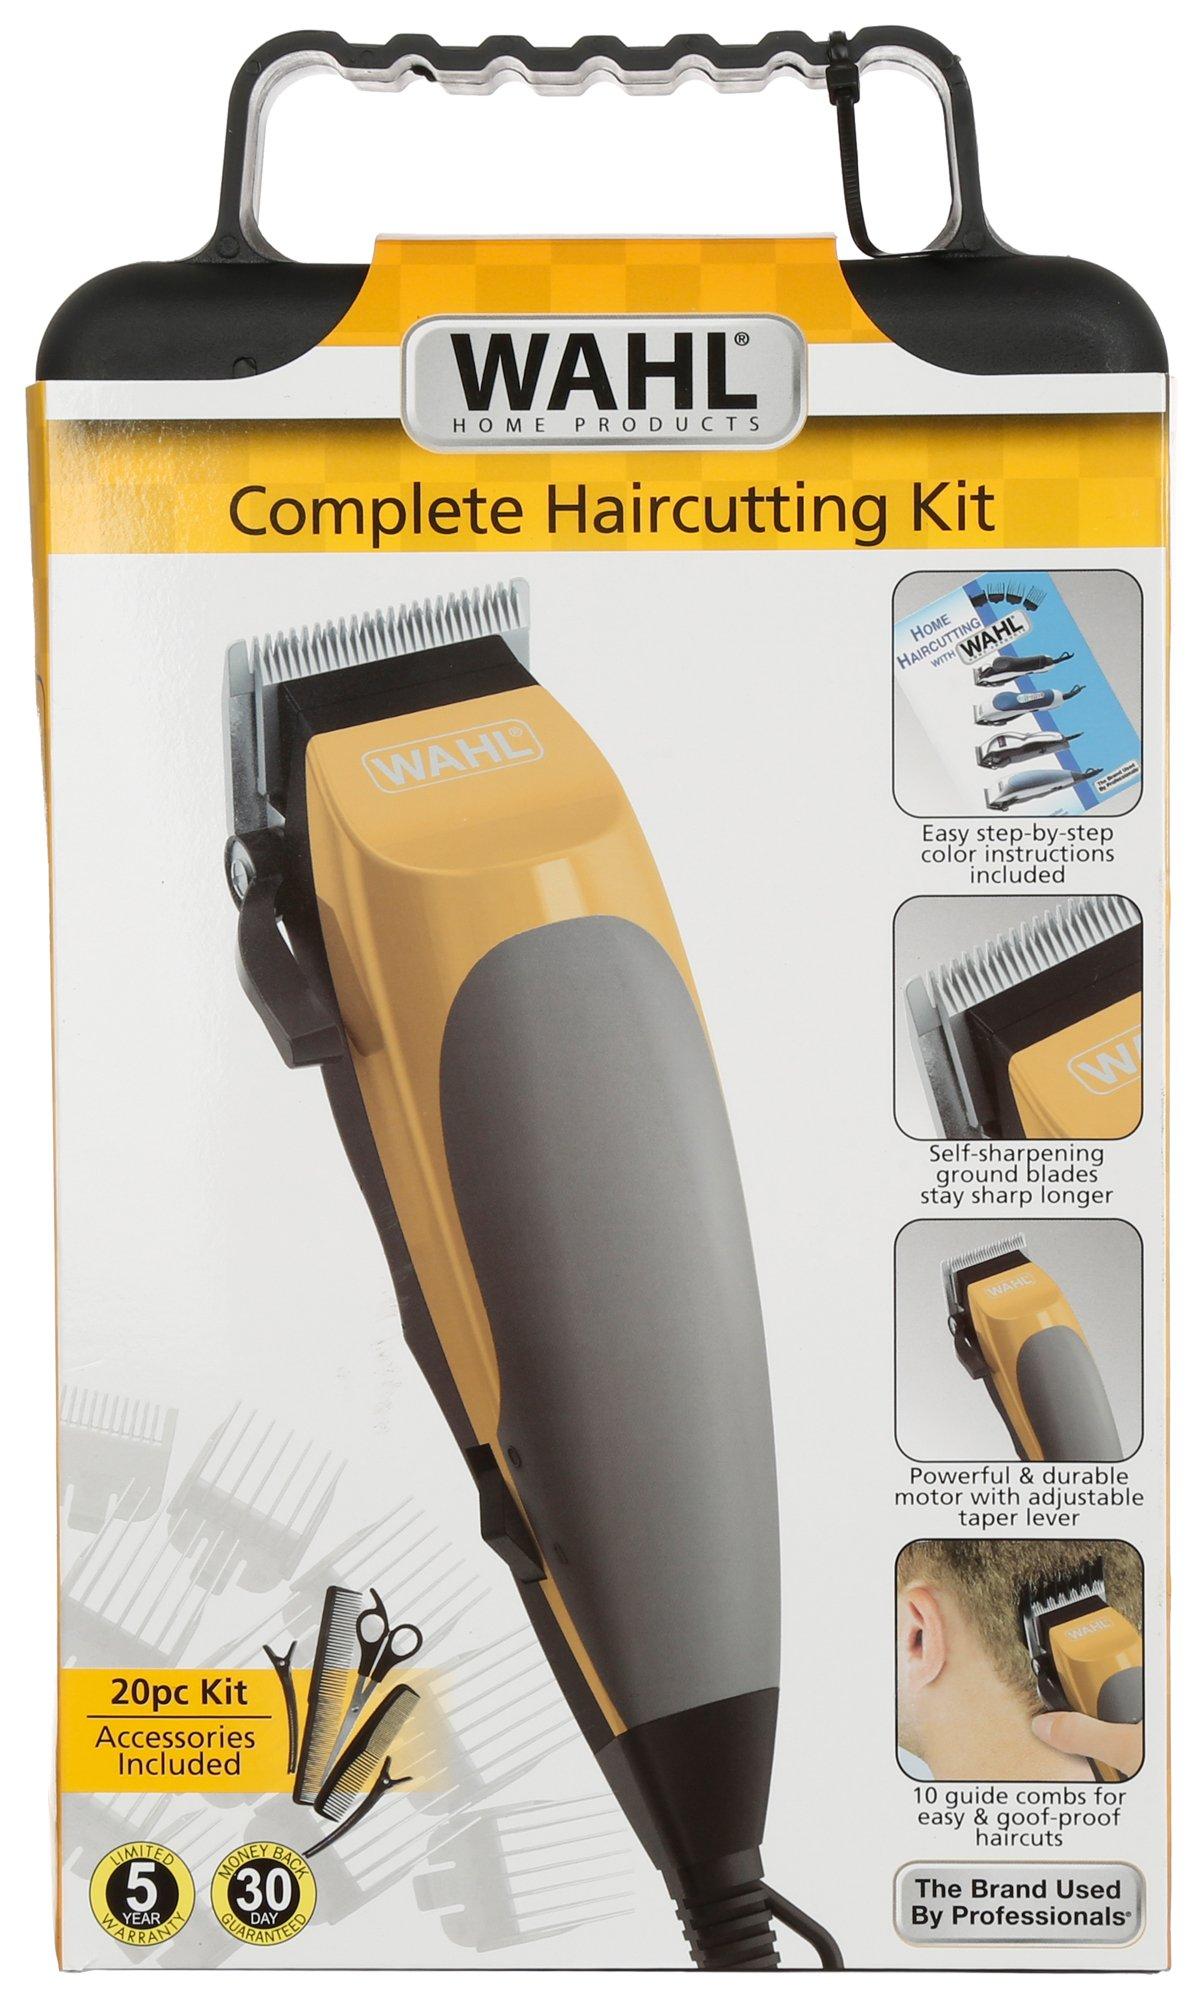 20 Pc Complete Haircutting Kit